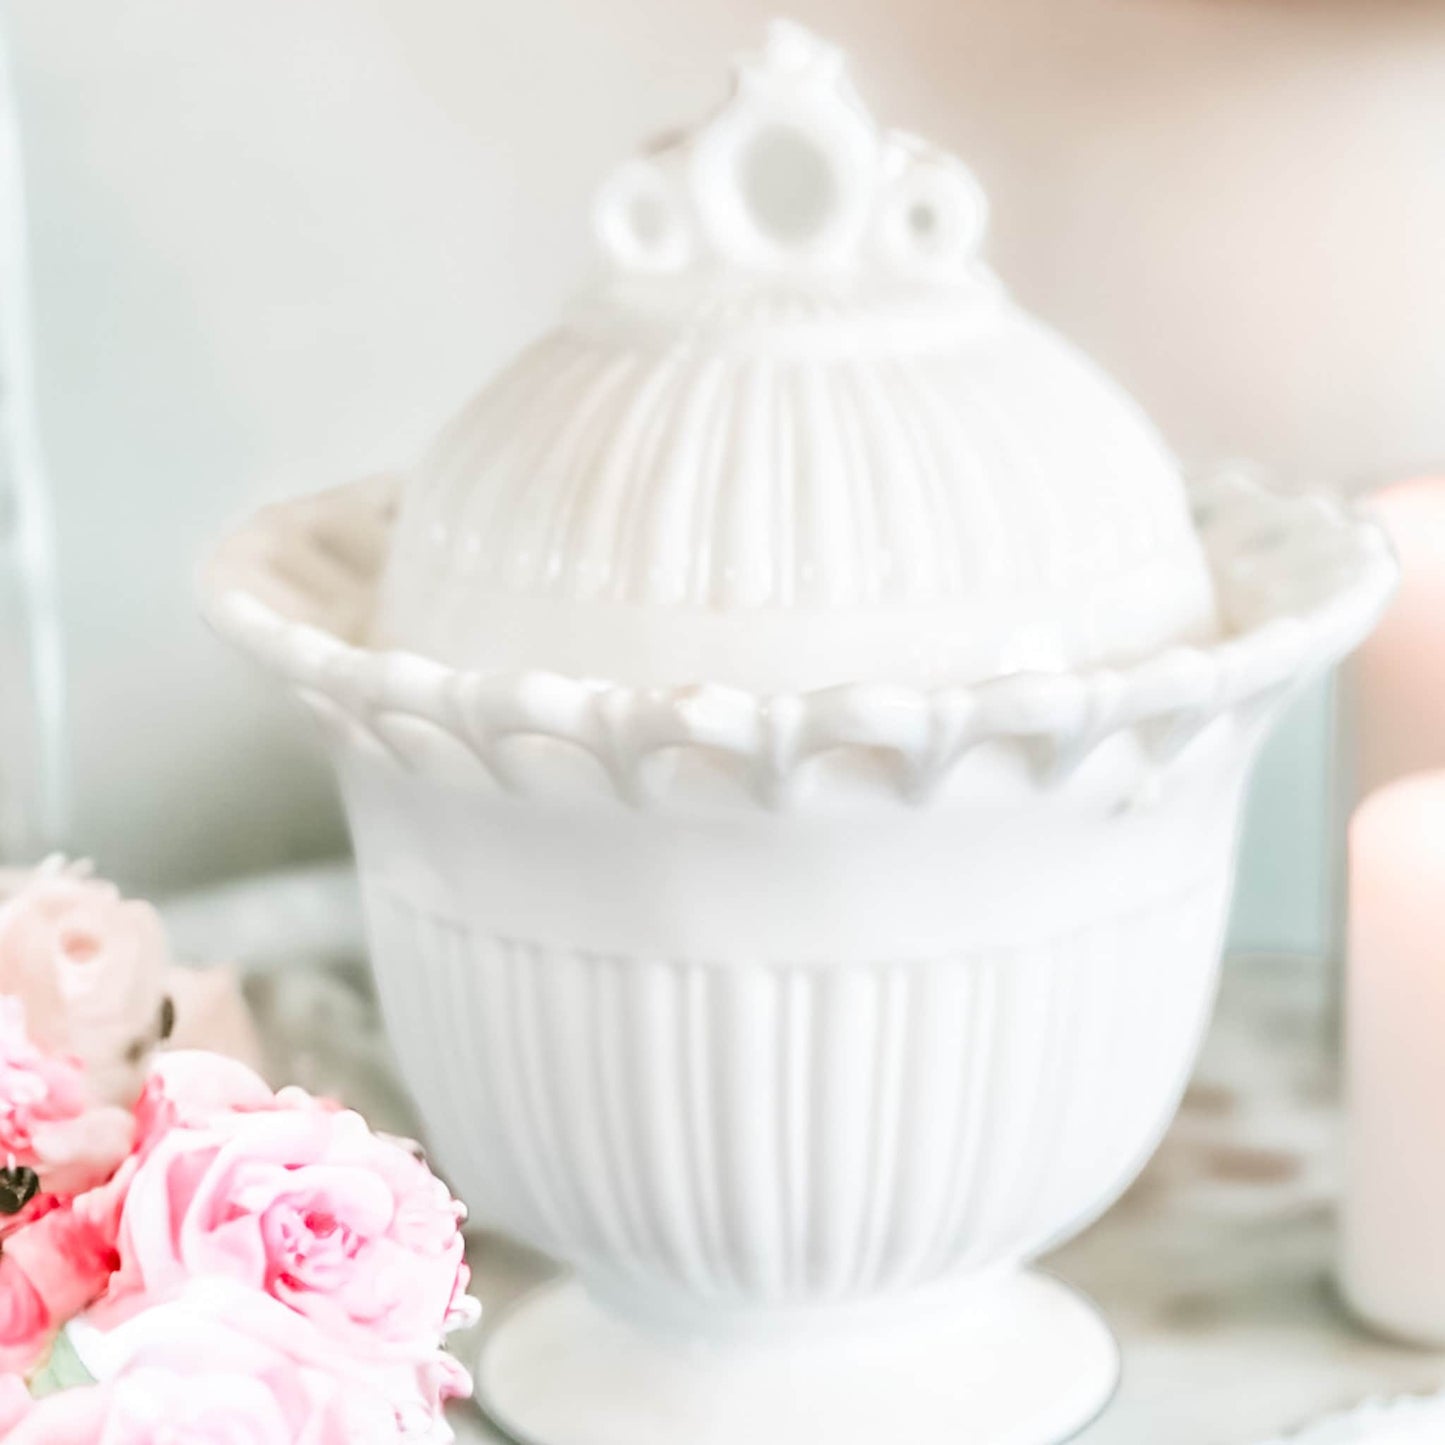 Soy Candles, Vintage, Milk Glass, Best Friend Gifts, Housewarming Gifts